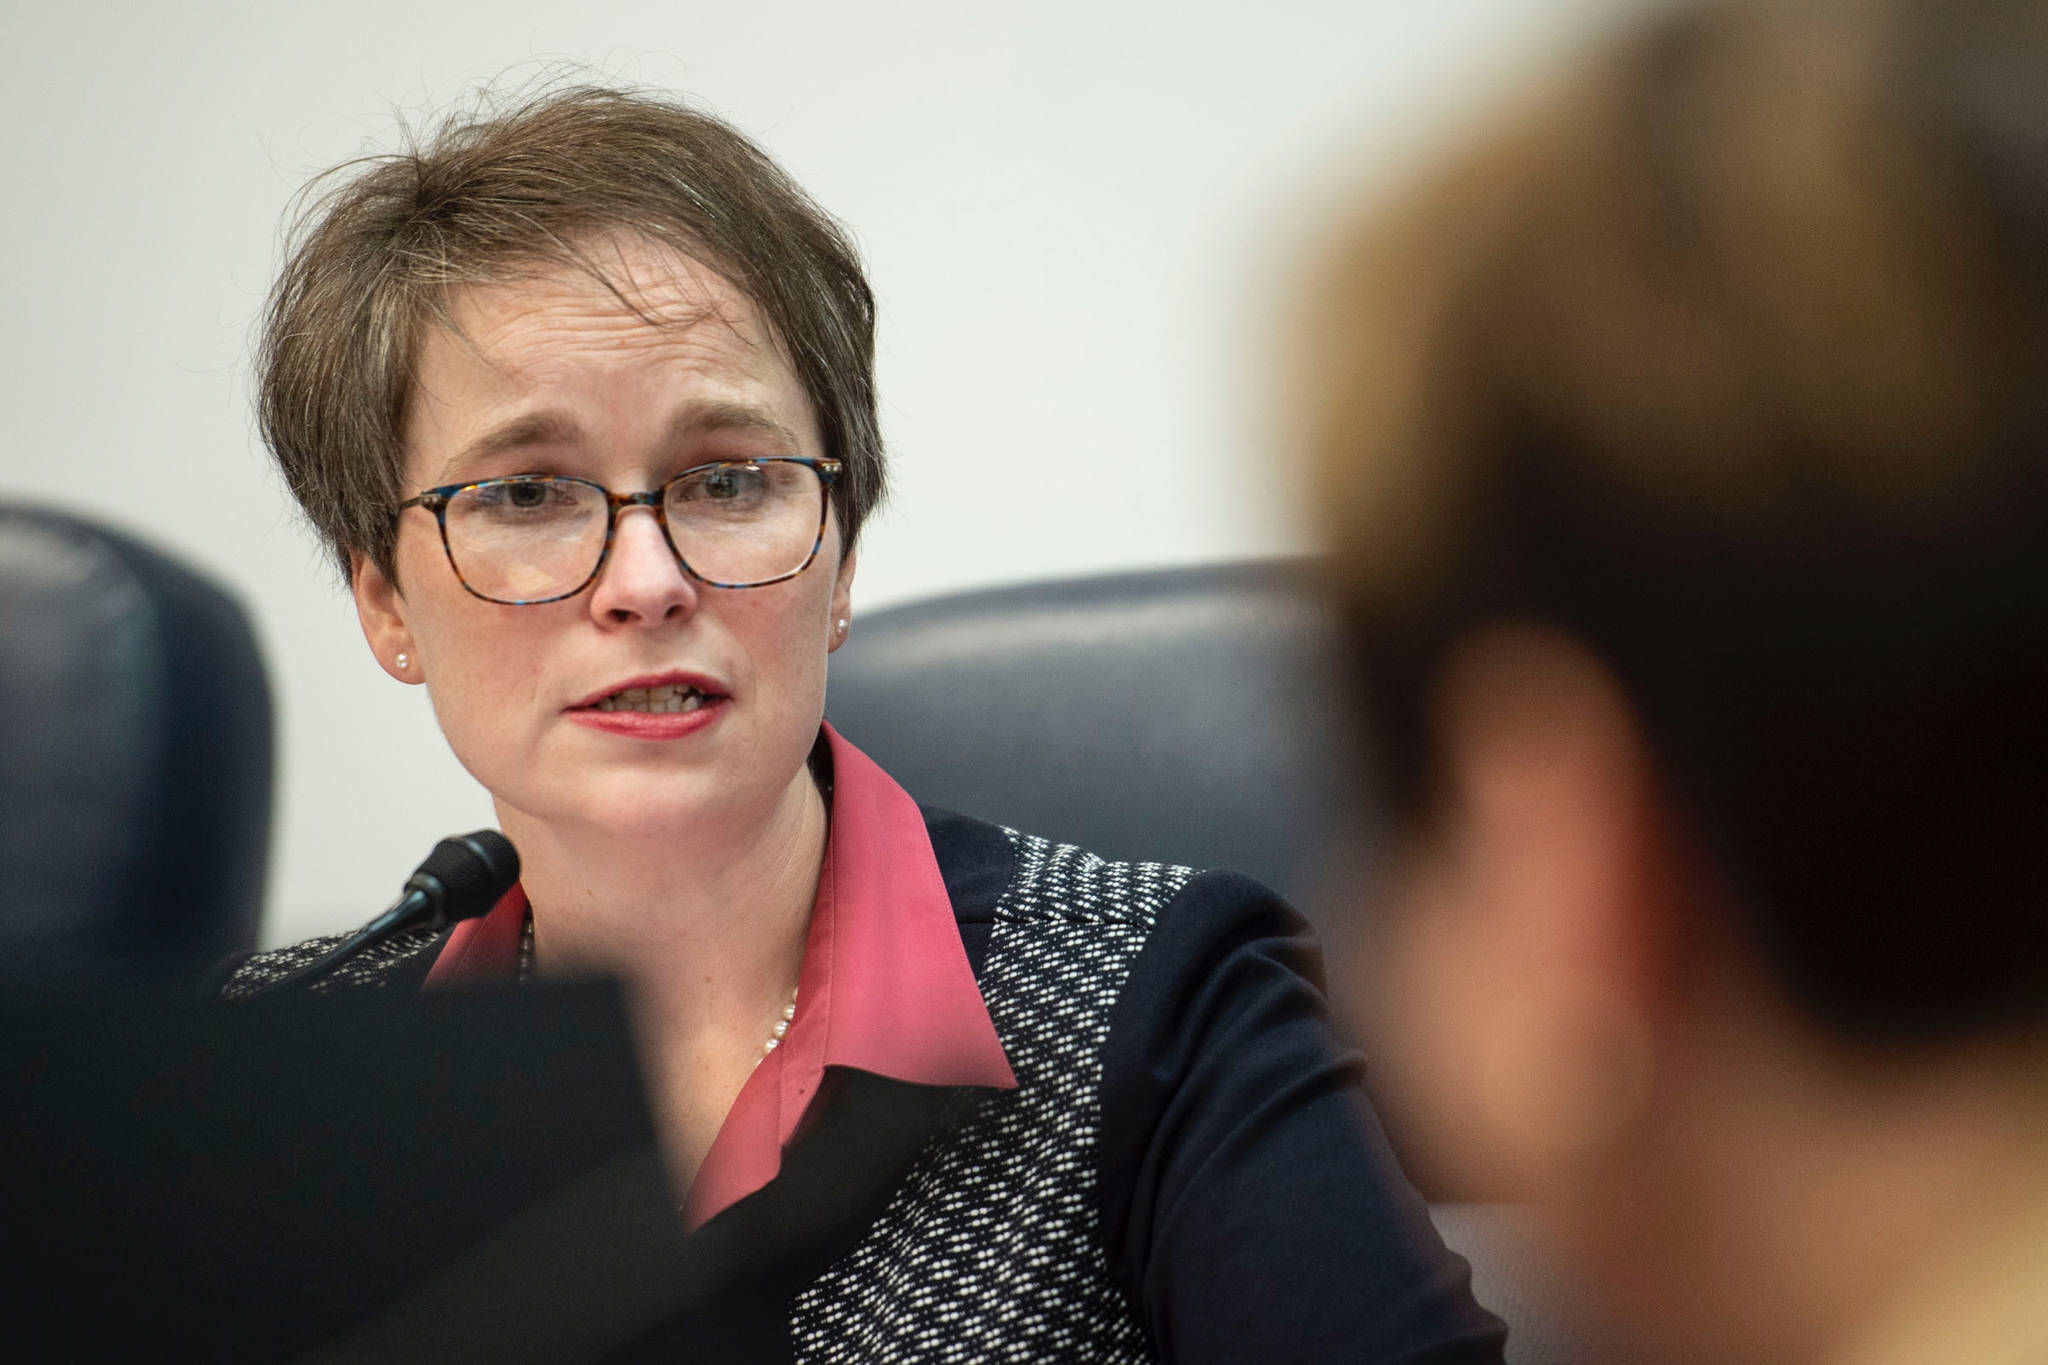 Rep. Sarah Vance, R-Homer, questions Angela Rodell, Chief Executive Officer of the Alaska Permanent Fund Corporation, during a House State Affairs Committee meeting about House Bill 139 at the Capitol on Thursday, April 25, 2019. (Michael Penn | Juneau Empire)